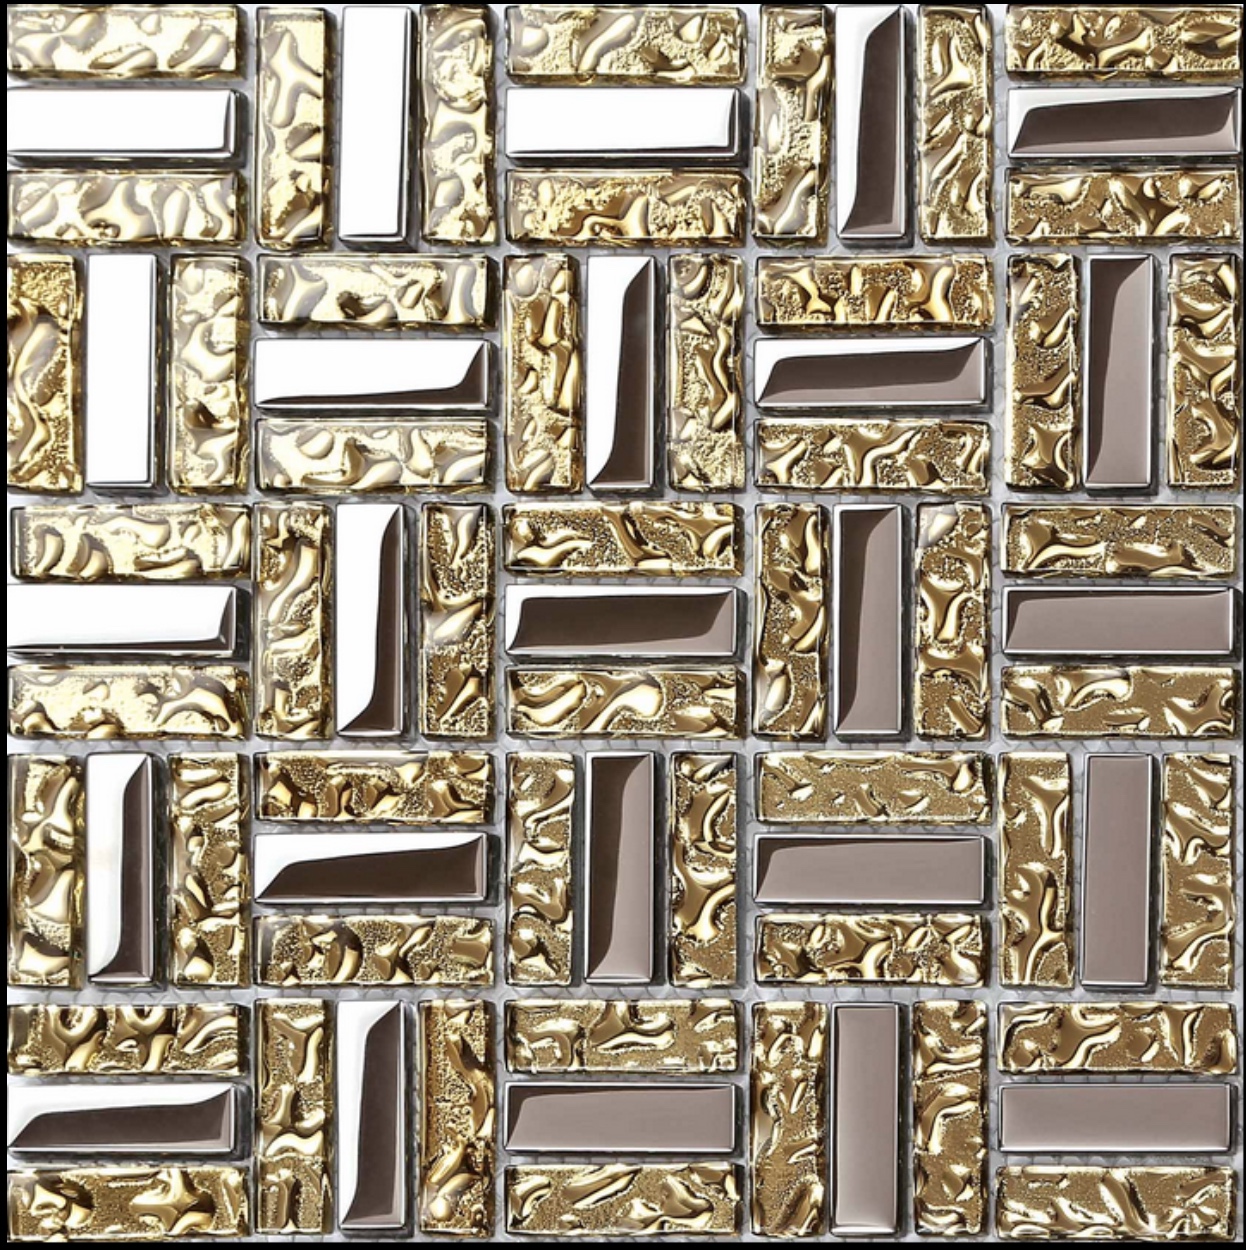 

Electroplated silver yellow gold glass mosaic kitchen tile backsplash CGMT1901 bathroom wall tiles